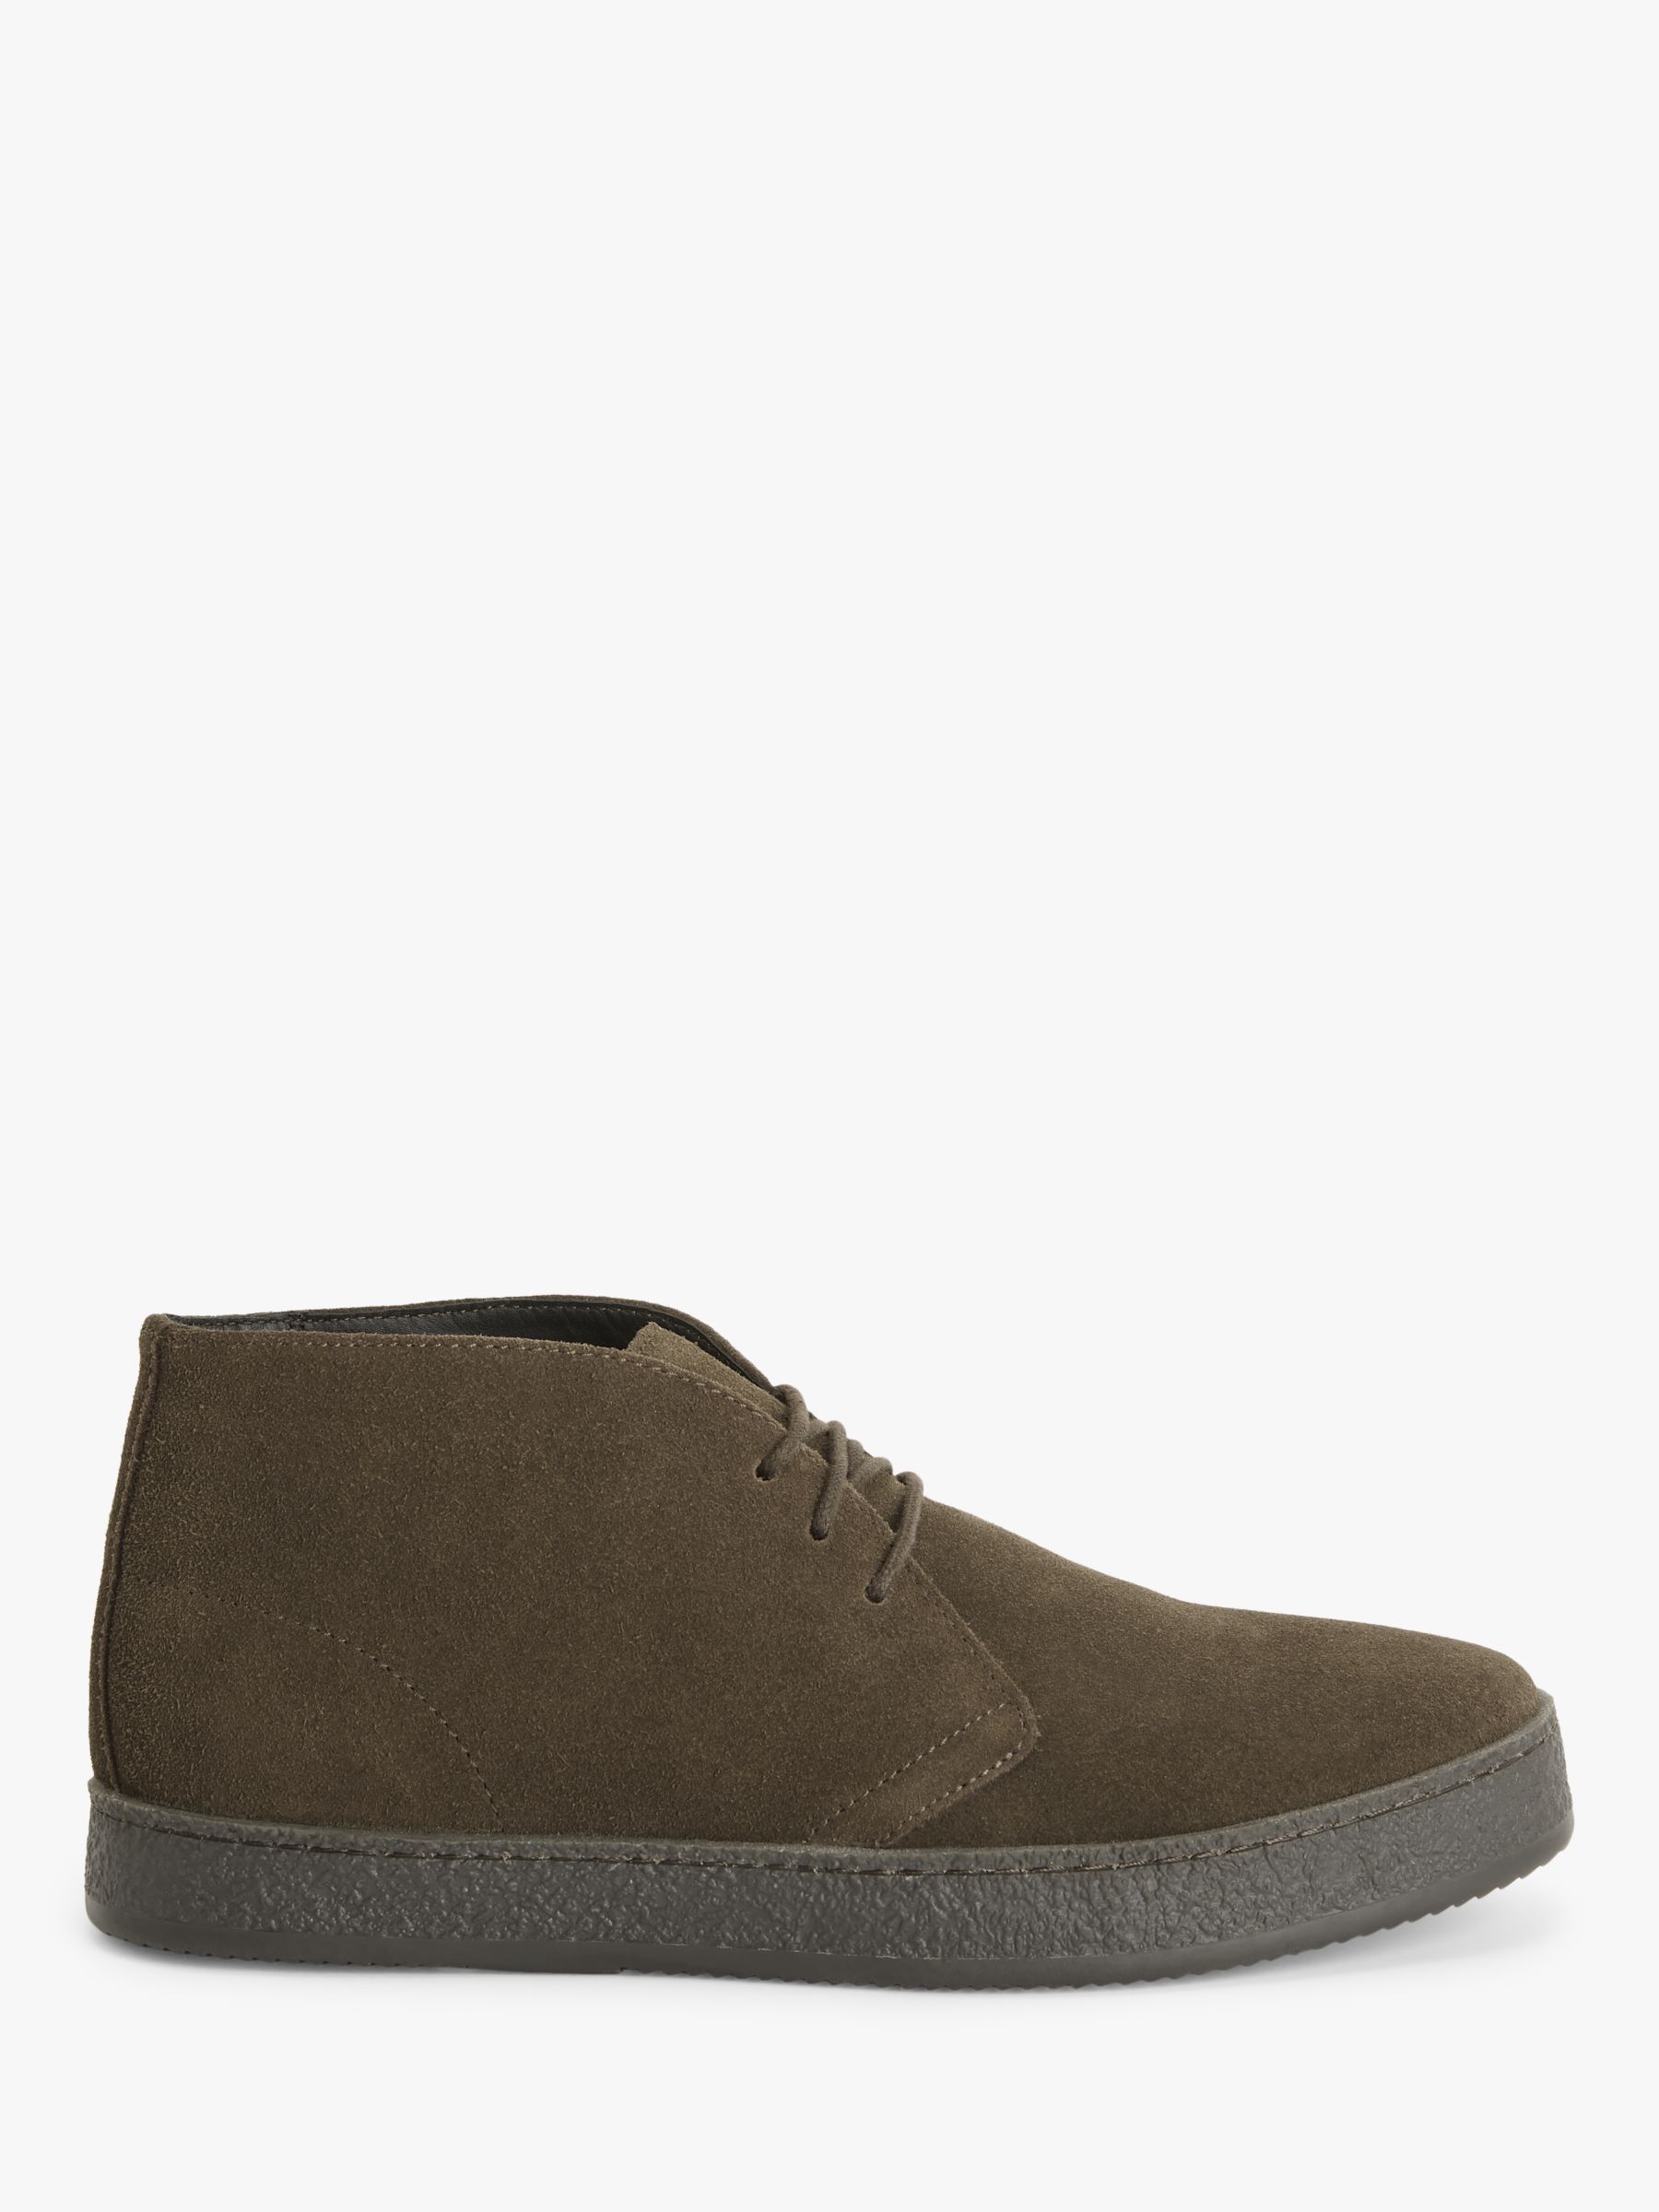 John Lewis Suede Cupsole Chukka Boots